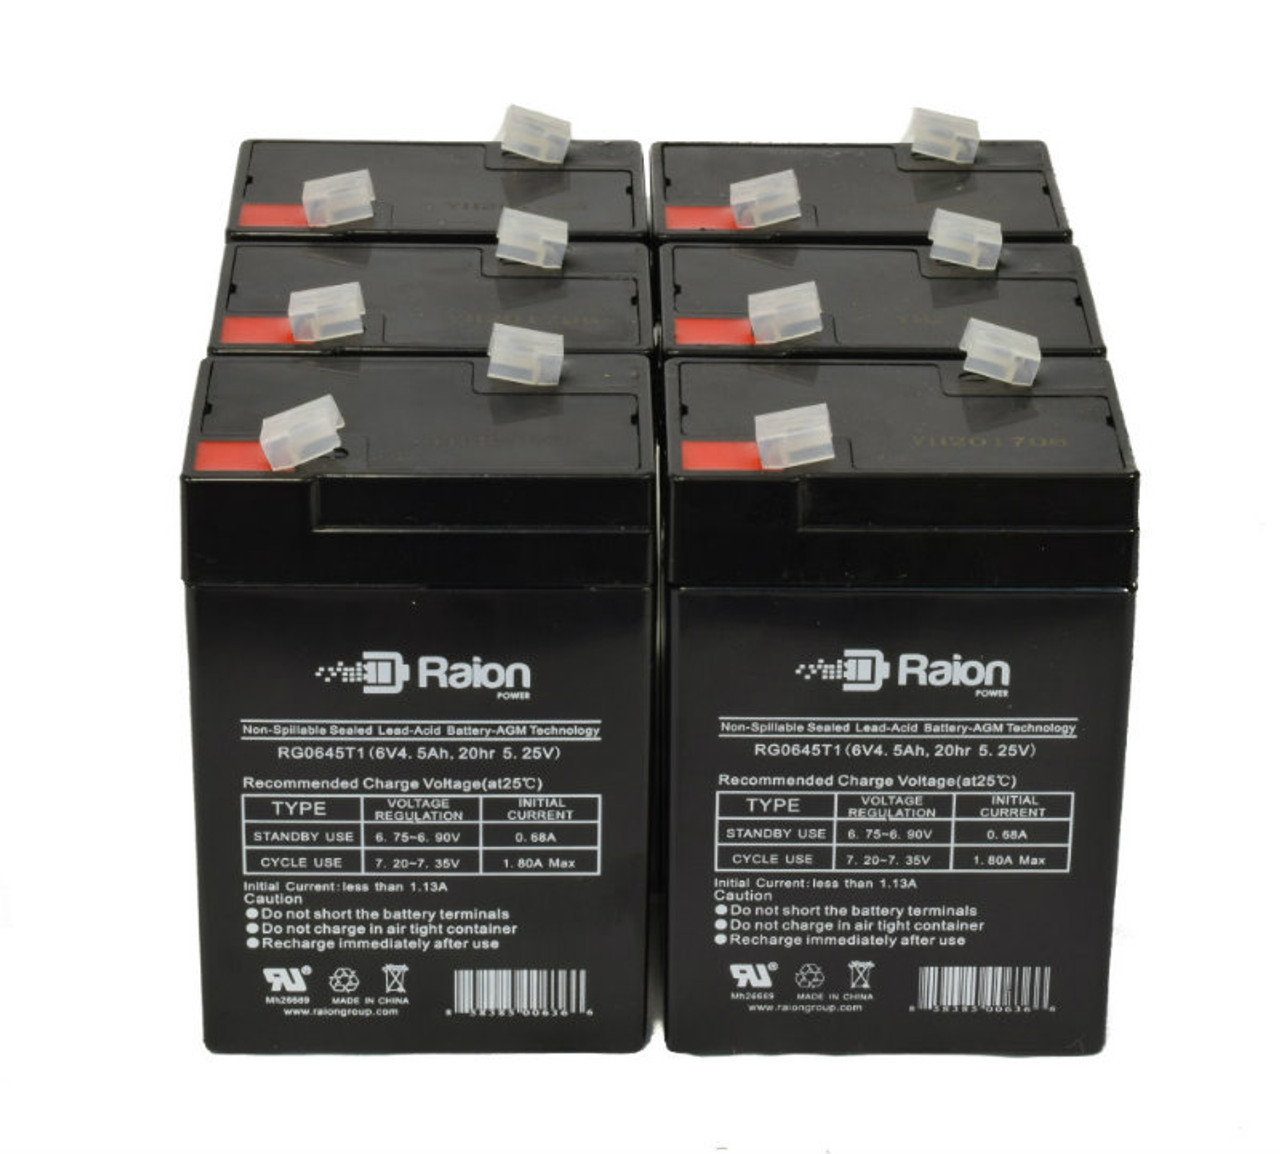 Raion Power 6V 4.5Ah Replacement Emergency Light Battery for Ademco 418O - 6 Pack